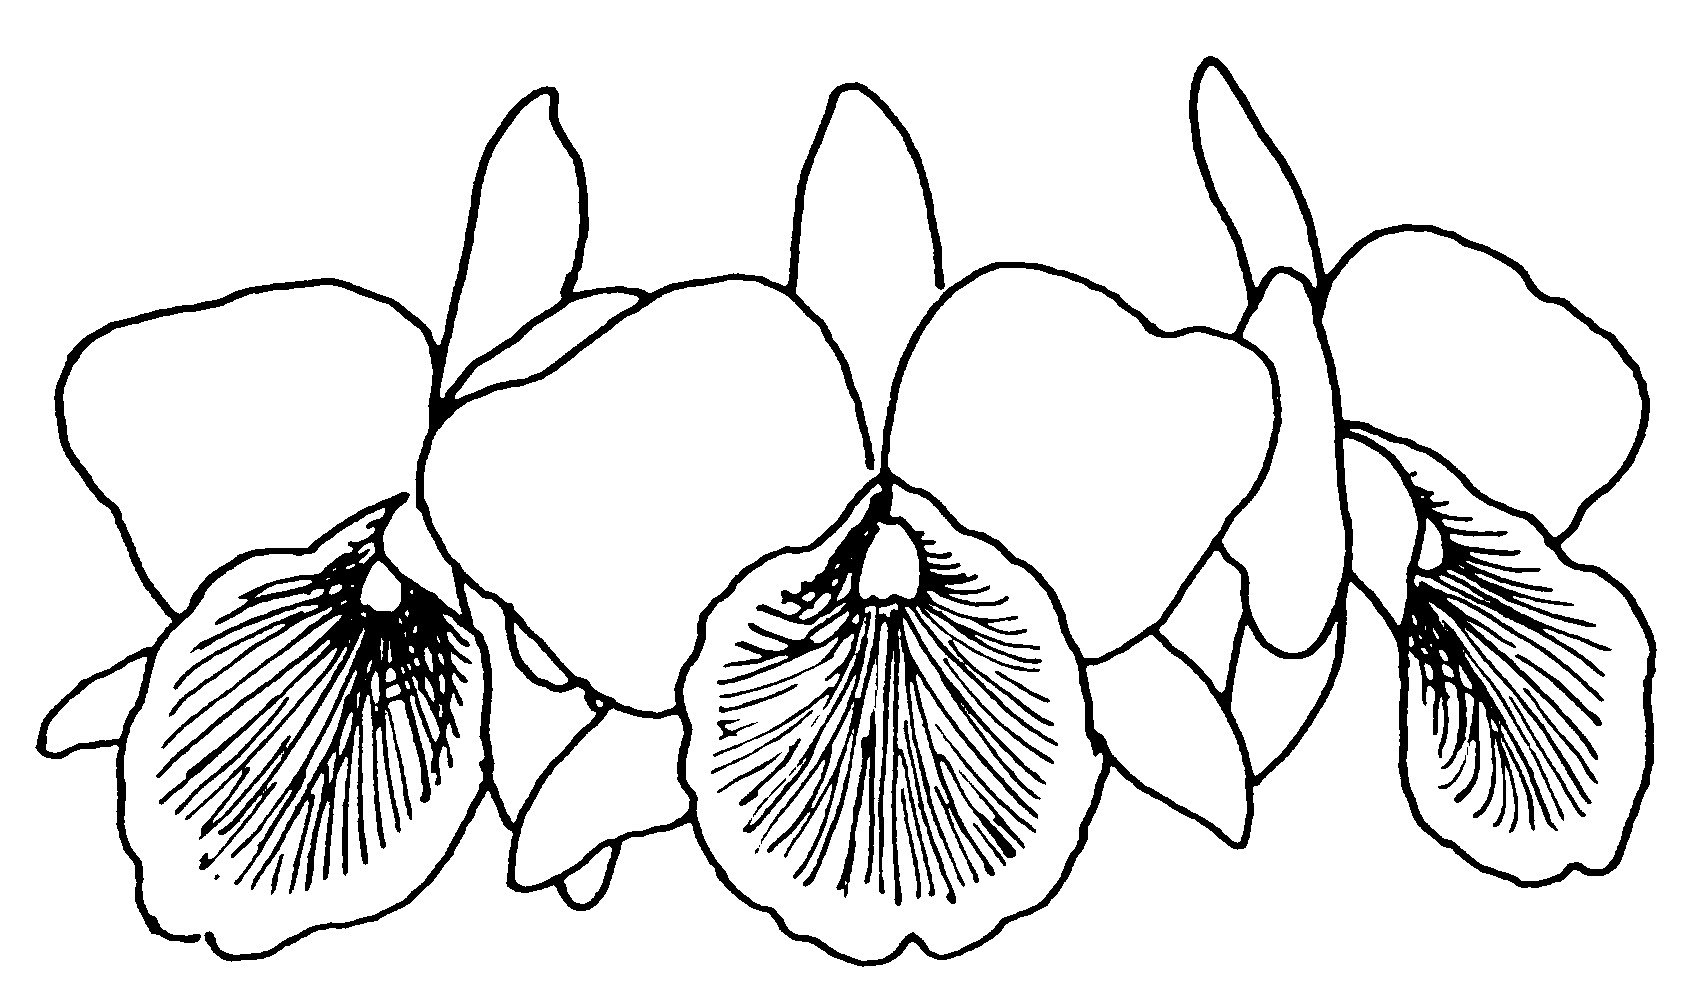 Orchid Drawing Outline at GetDrawings.com.